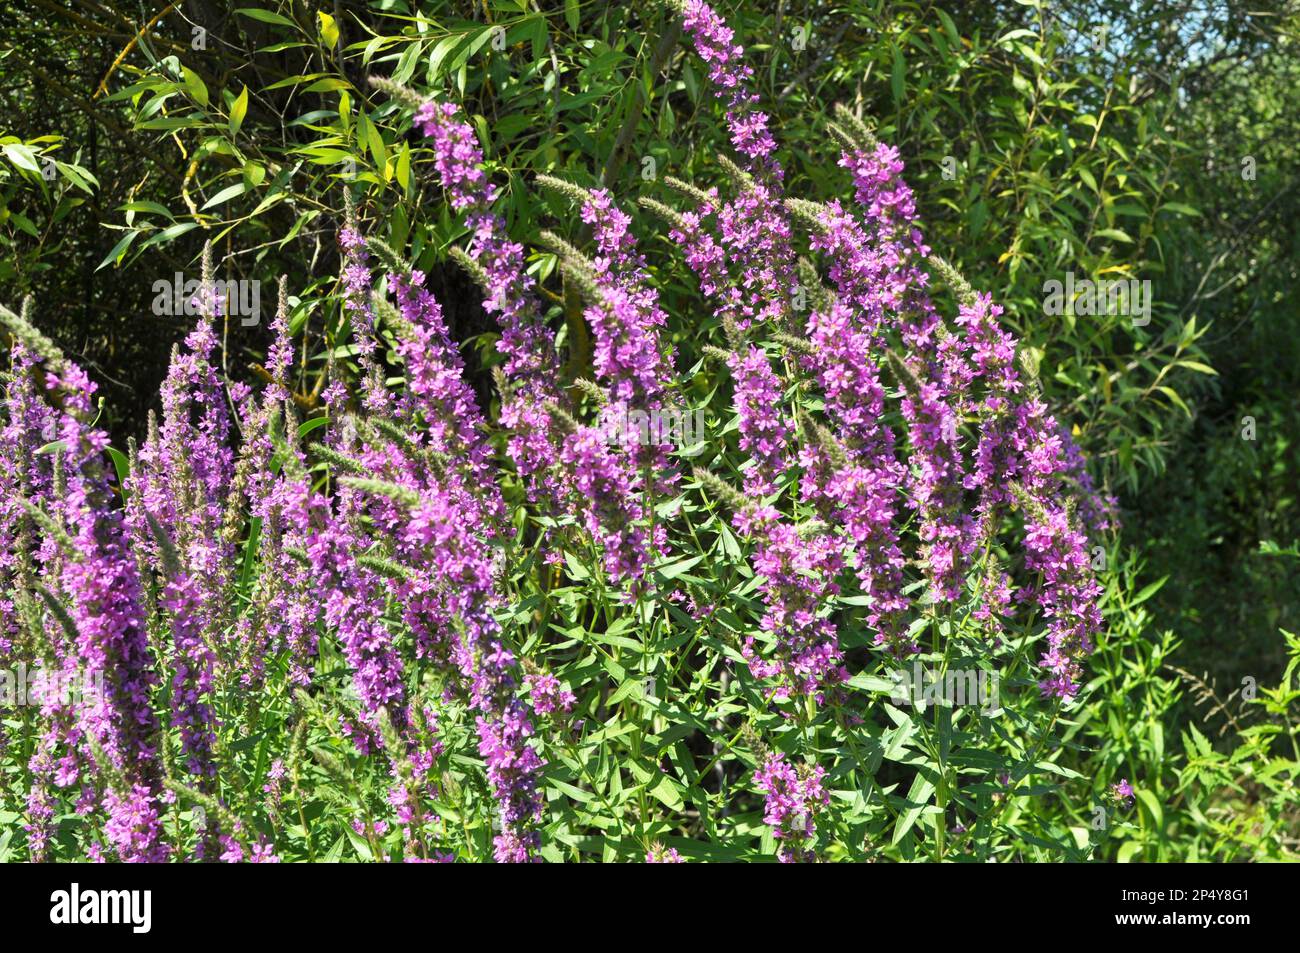 Lythrum salicaria grows in the wild on the riverbank and in wet places Stock Photo